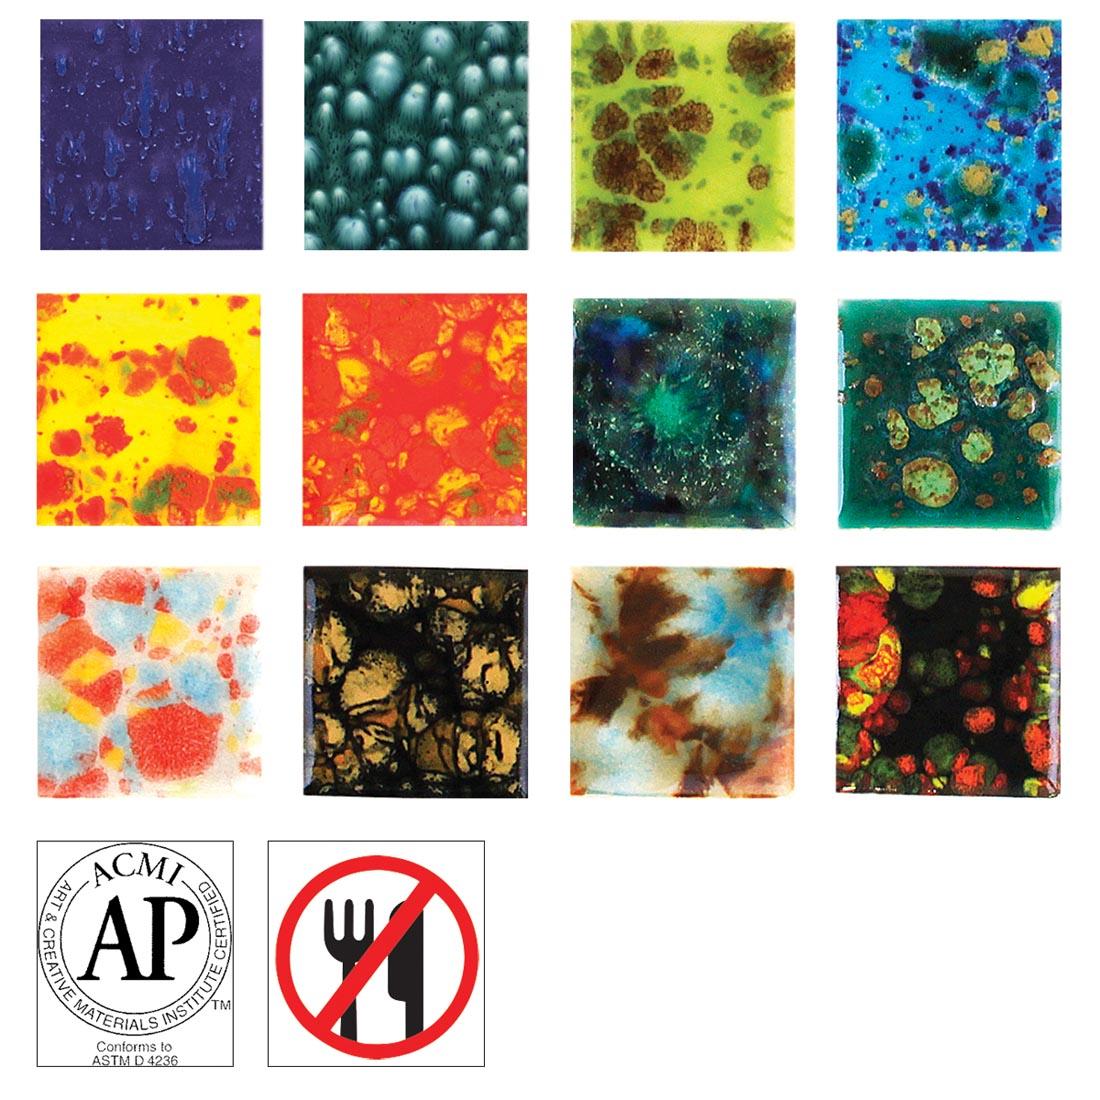 12 Sample Tiles from the Mayco Jungle Gems Crystal Glaze Set along with symbols for AP Seal and non-food safe